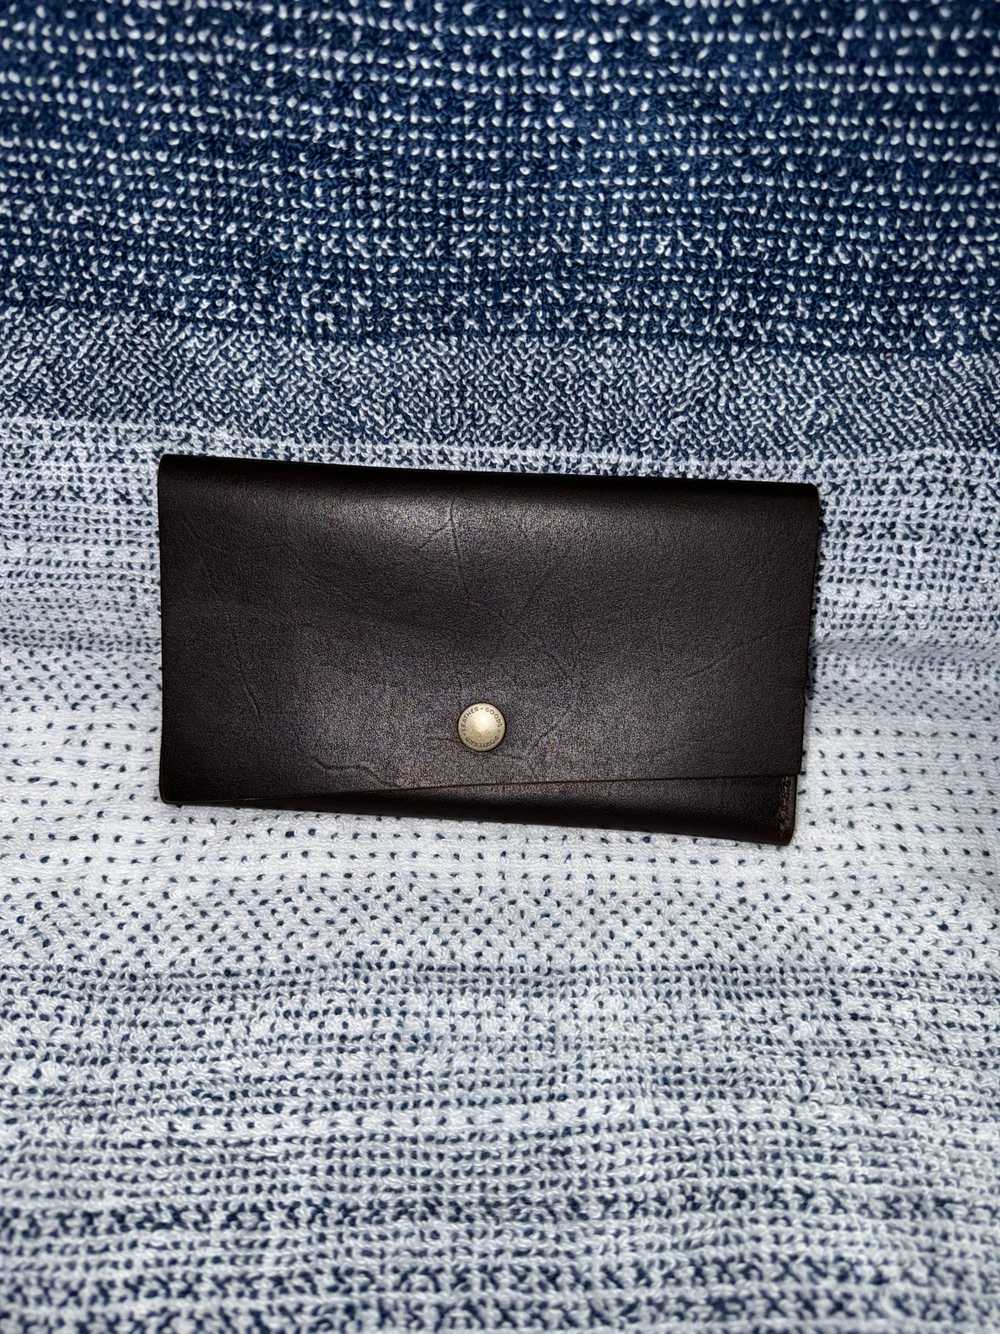 Portland Leather Leather Rancher Wallet - image 4